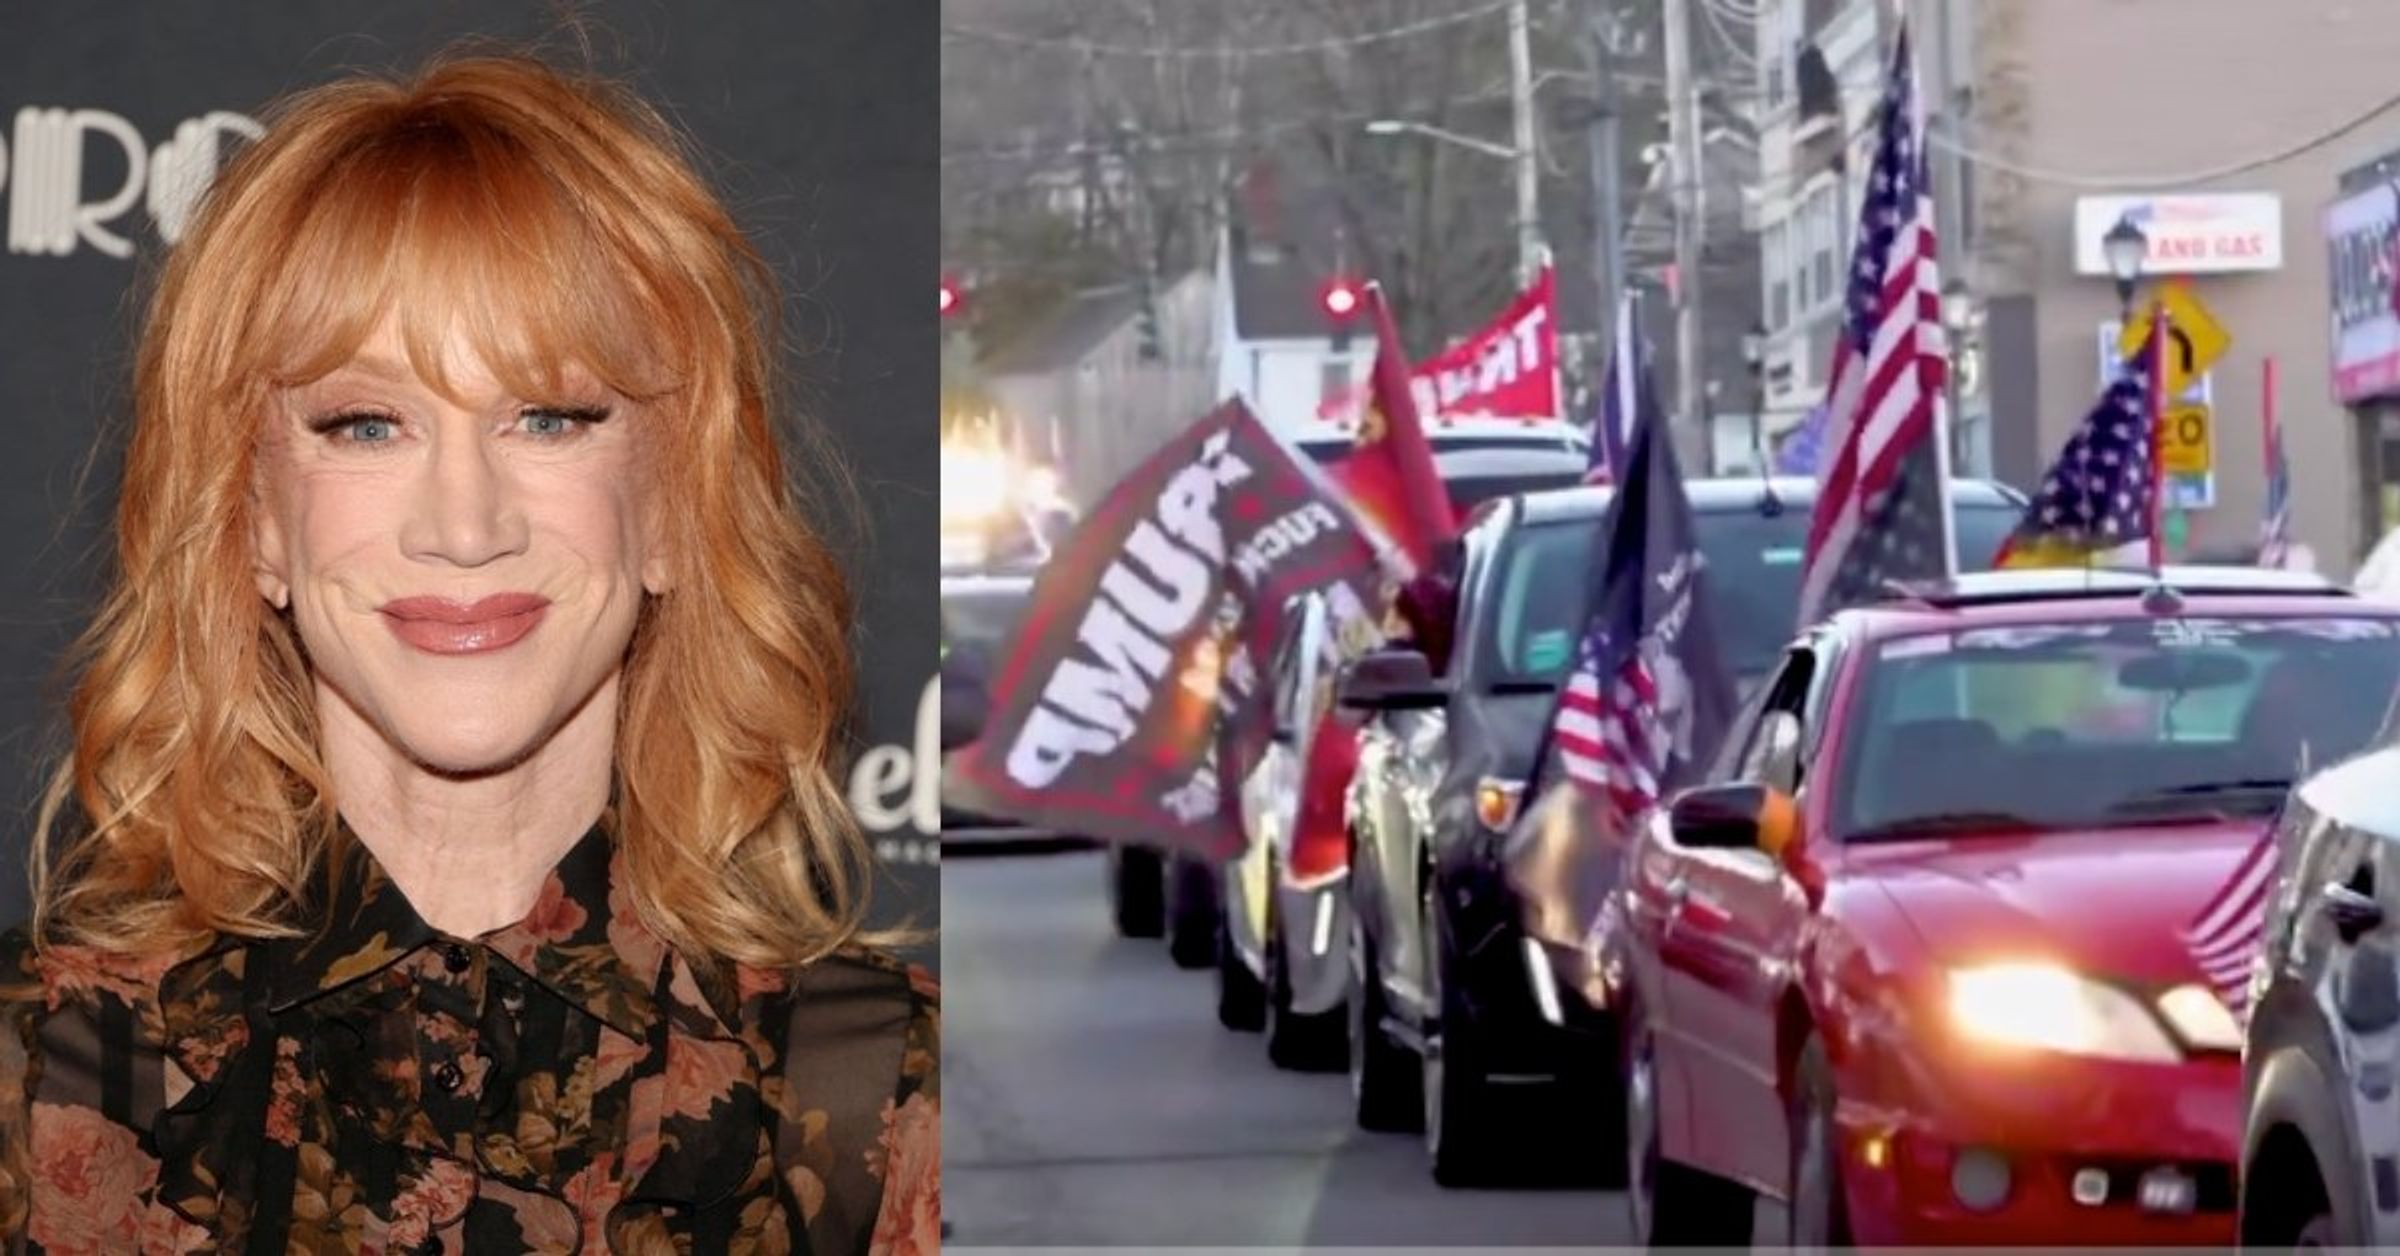 Kathy Griffin Thanks MAGA Fans For The Free ‘Publicity’ After They Protest Outside Her Show (comicsands.com)